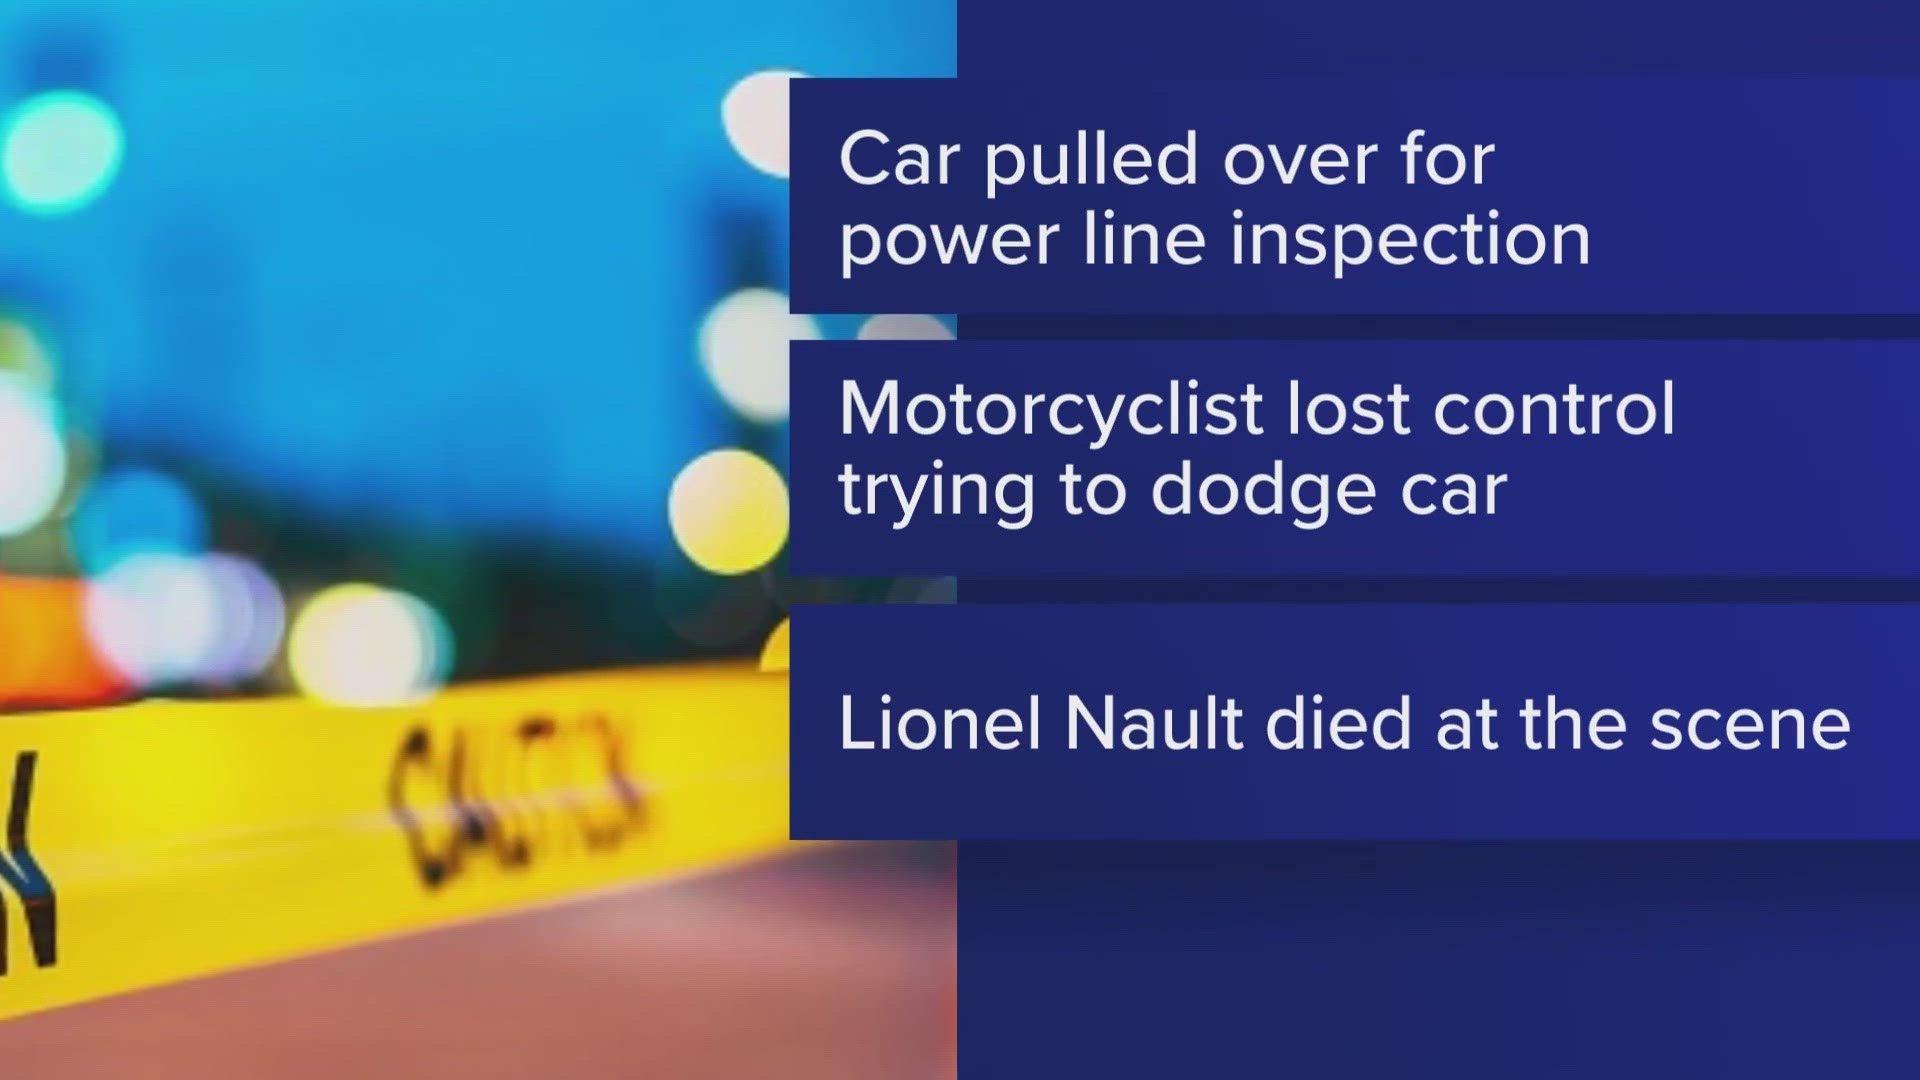 The motorcyclist was reportedly trying to avoid a vehicle that had stopped to inspect power lines, the sheriff's office said.